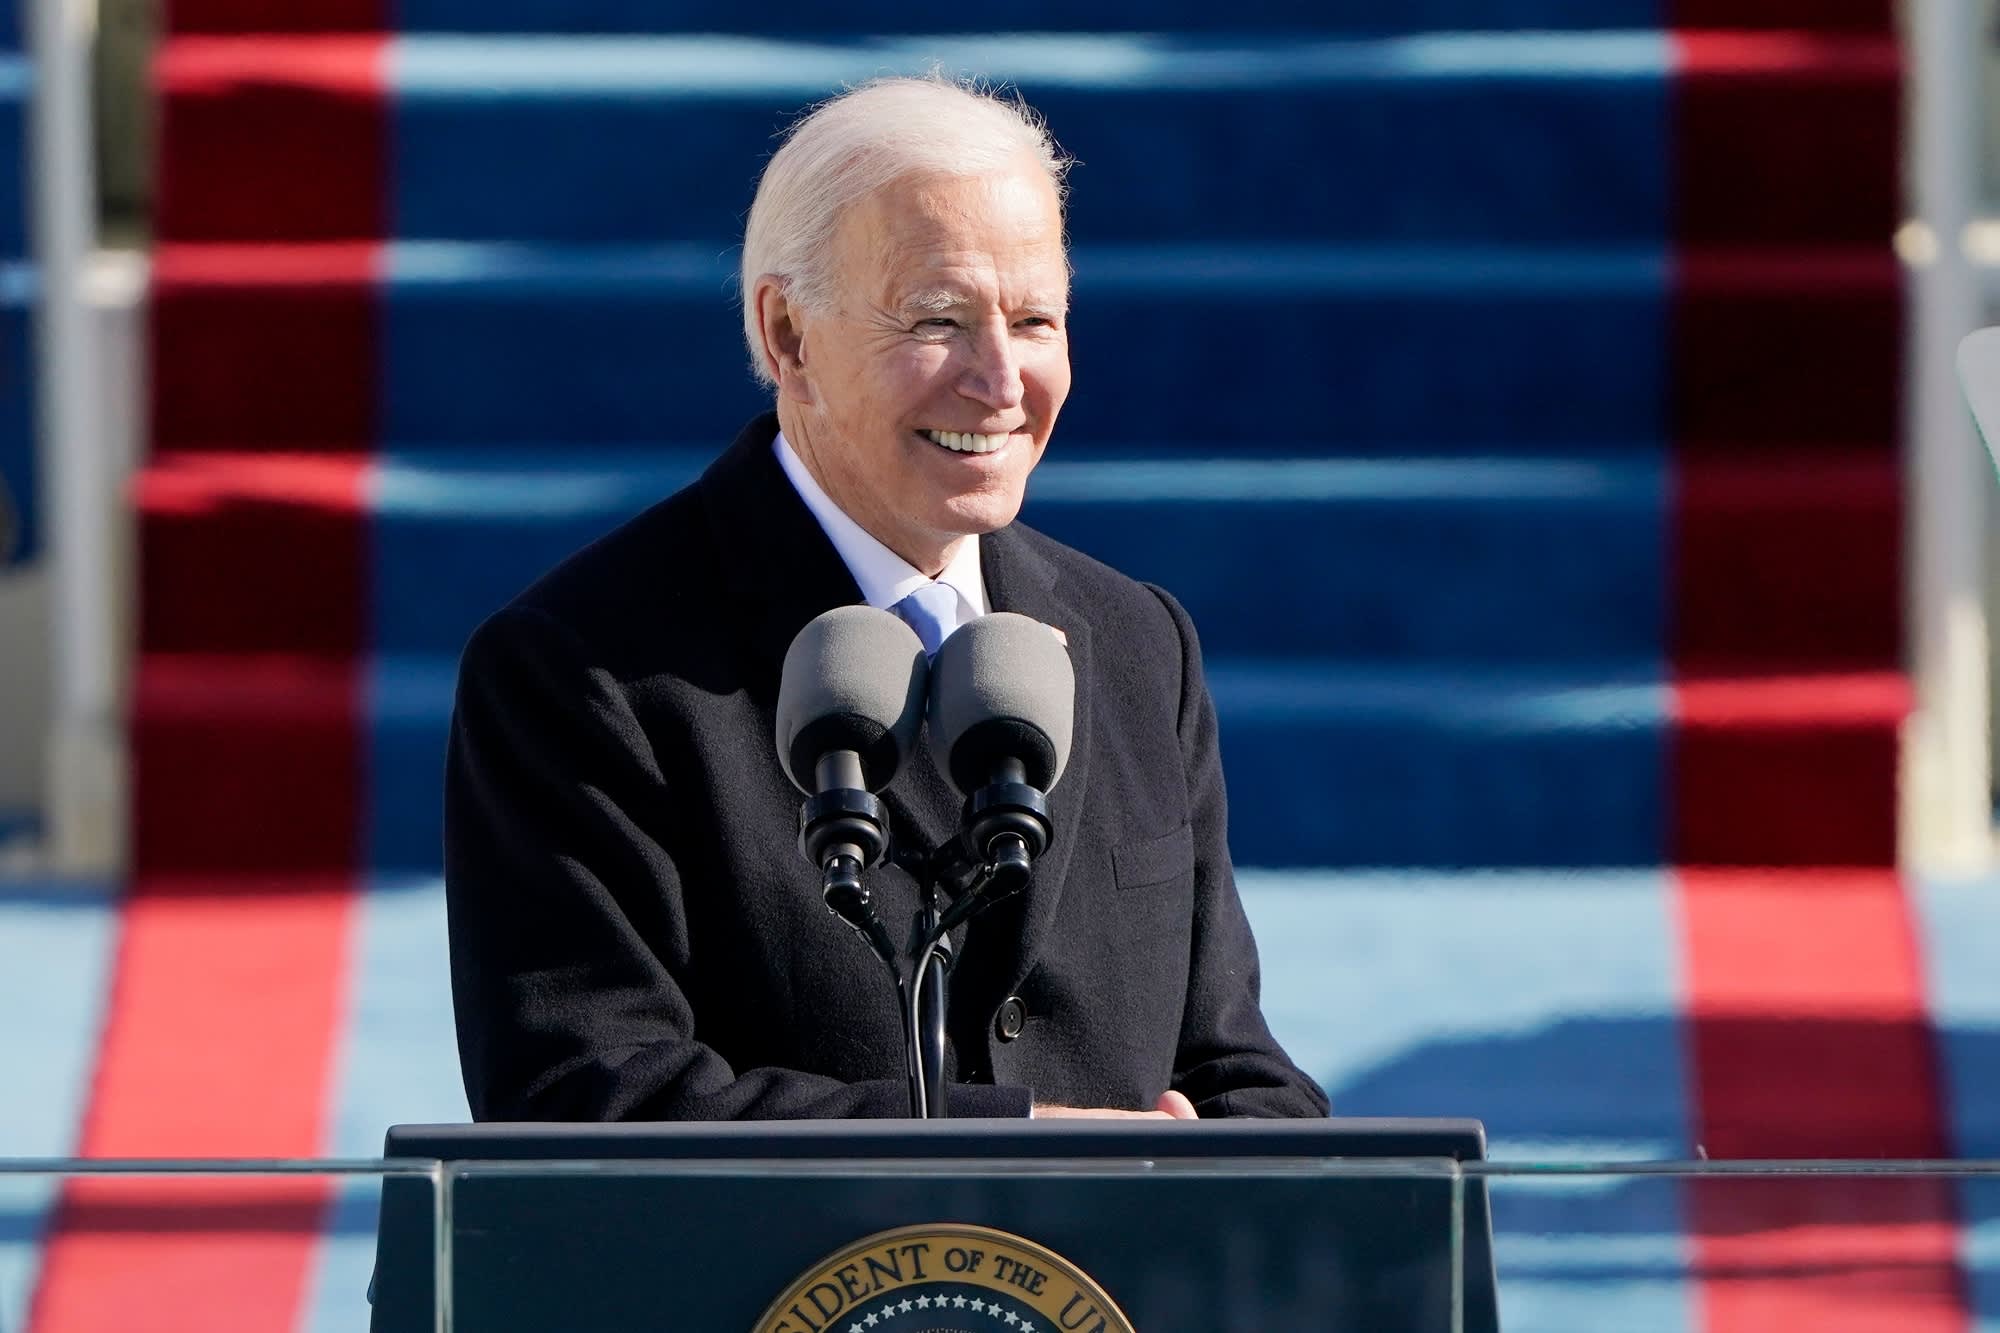 Experts weigh in on Biden’s support of $10,000 in student debt forgiveness